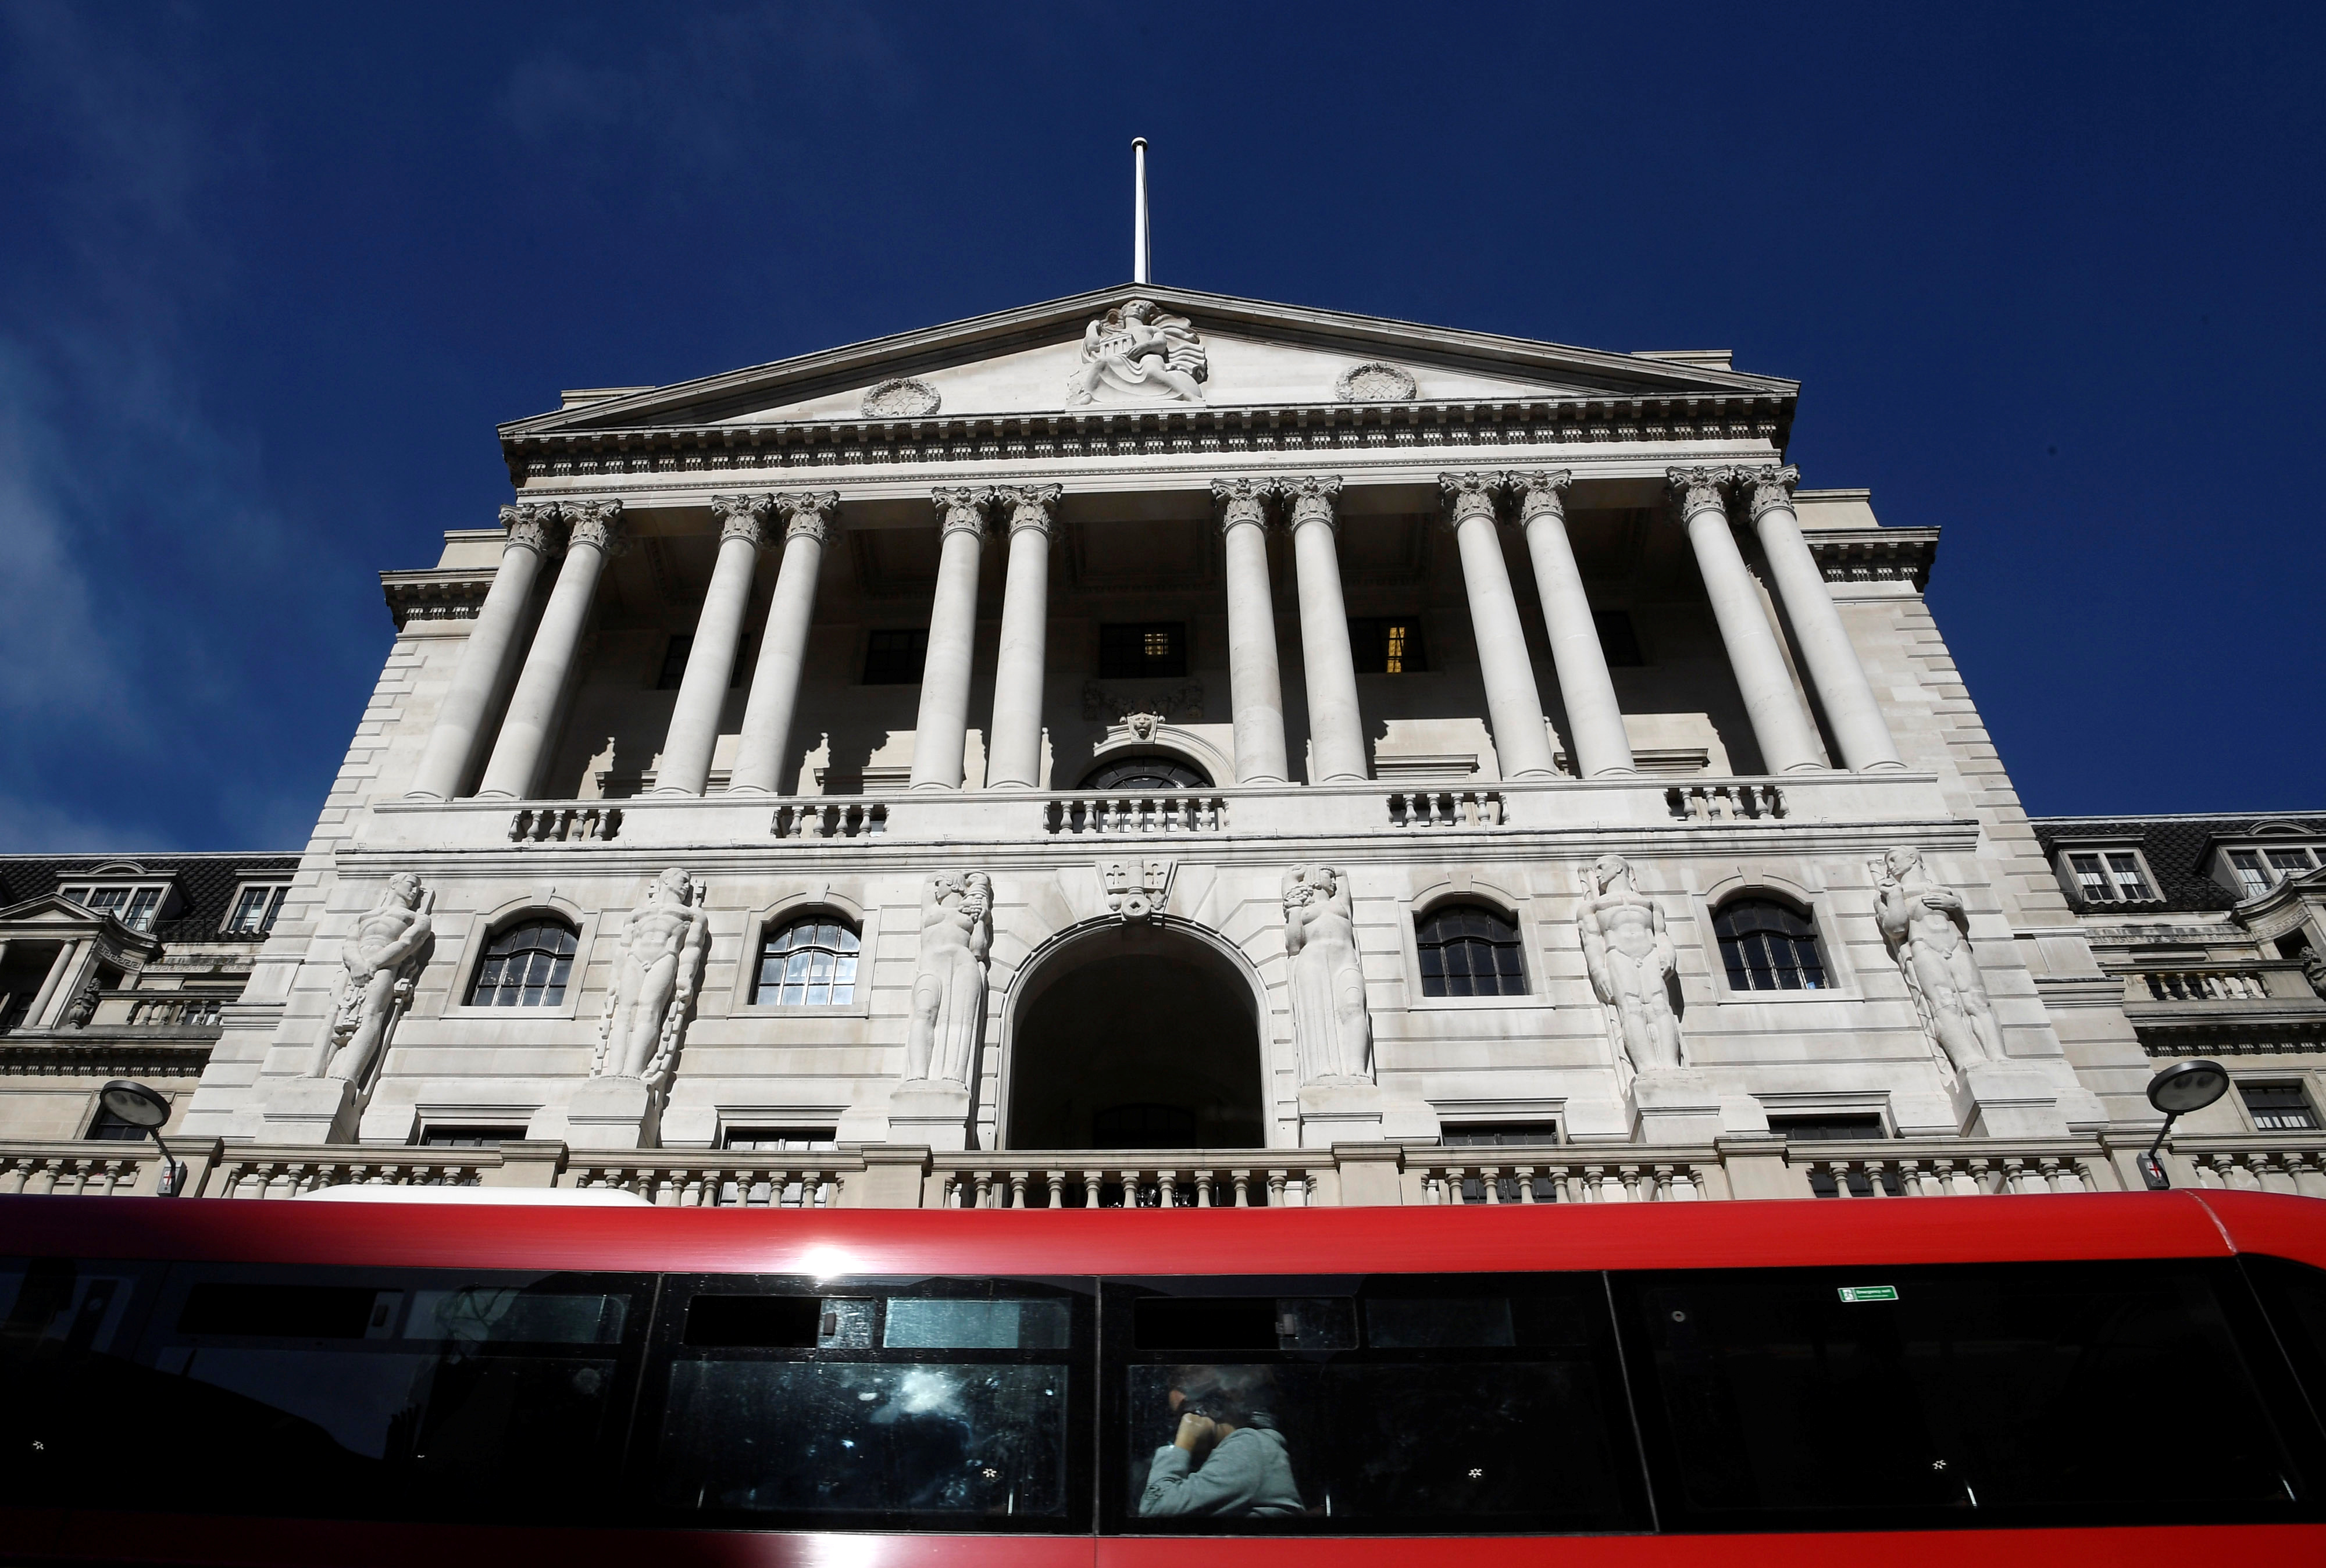 People travel on a bus as it passes the Bank of England in the City of London